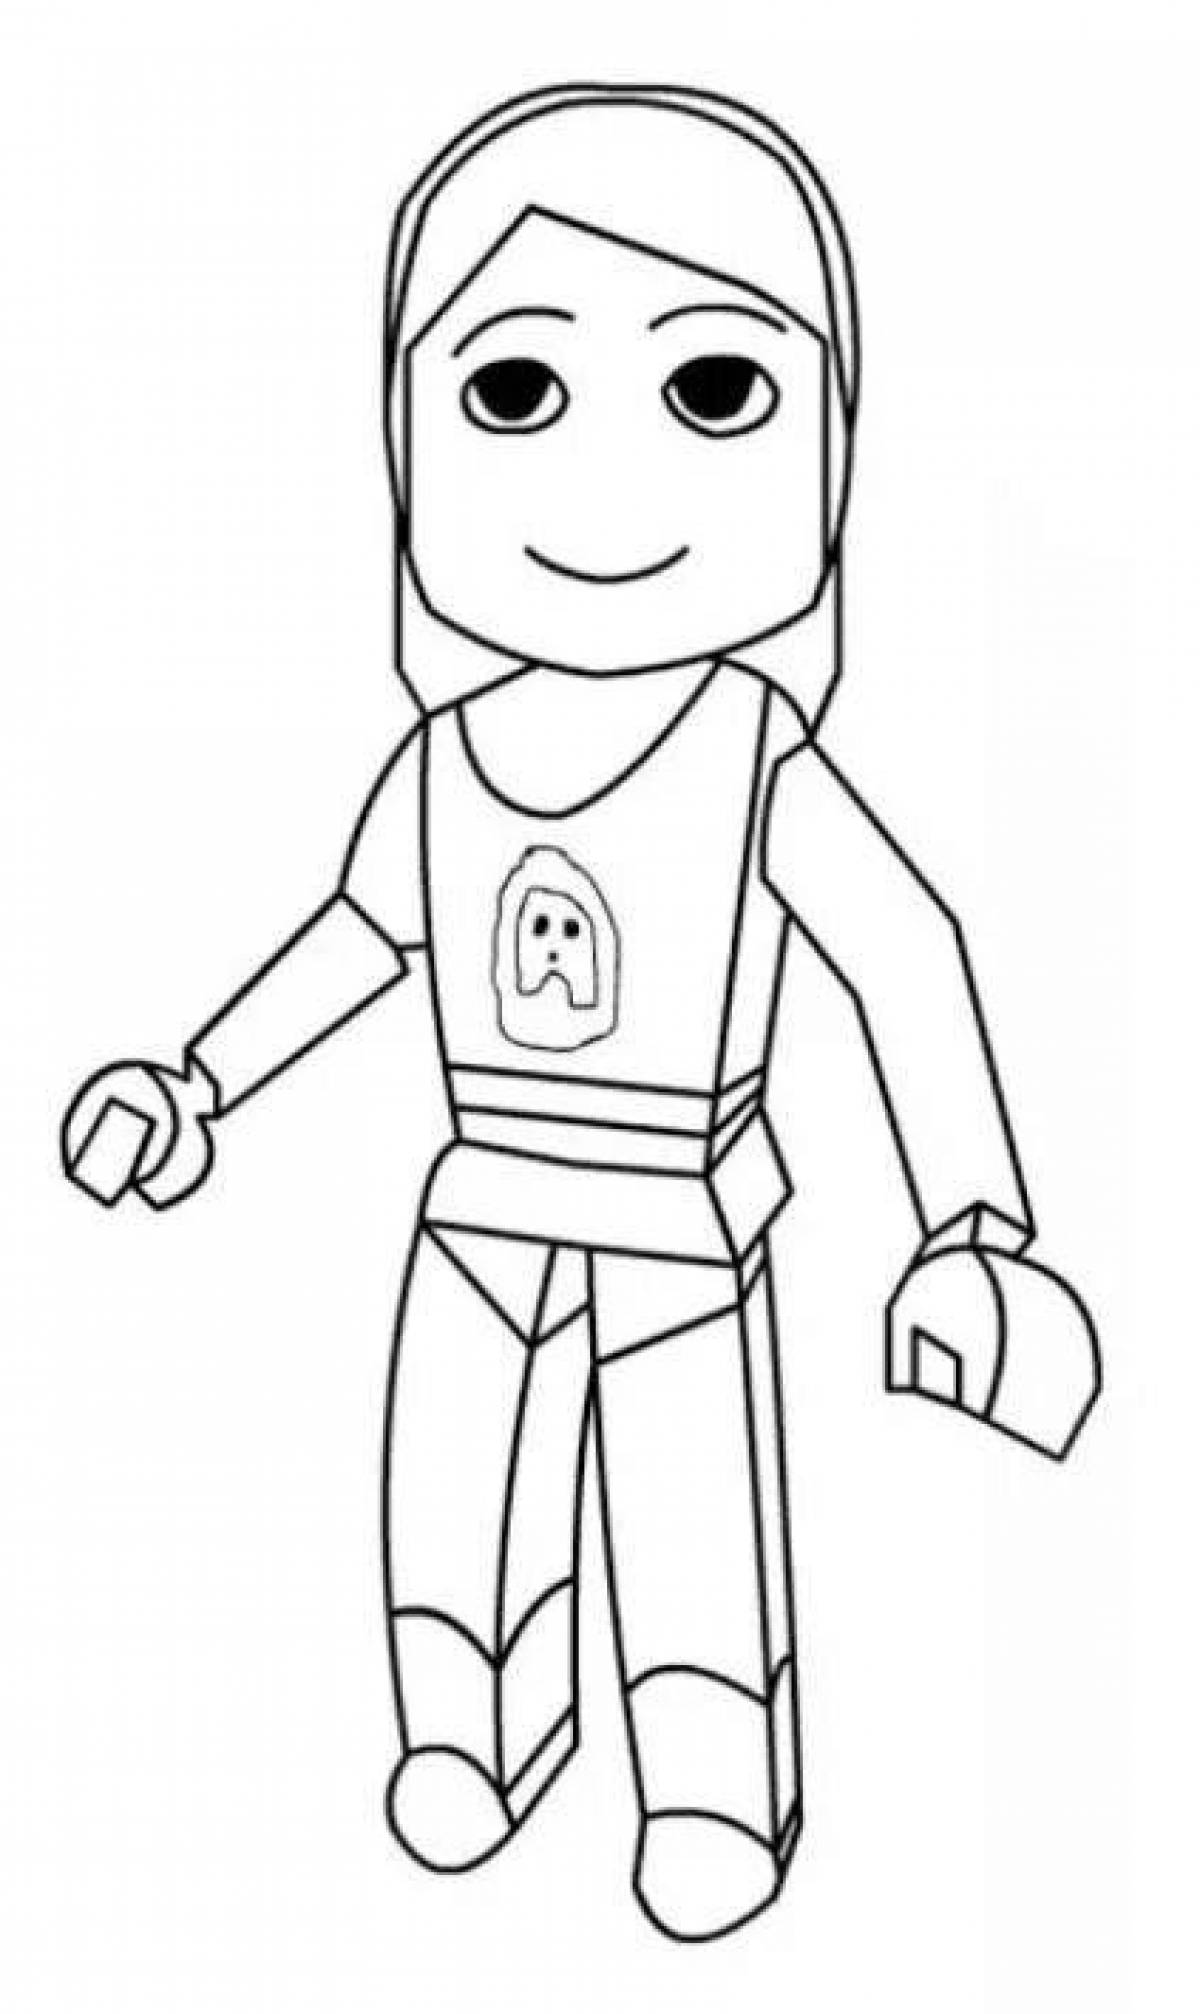 Colorful roblox girl coloring page